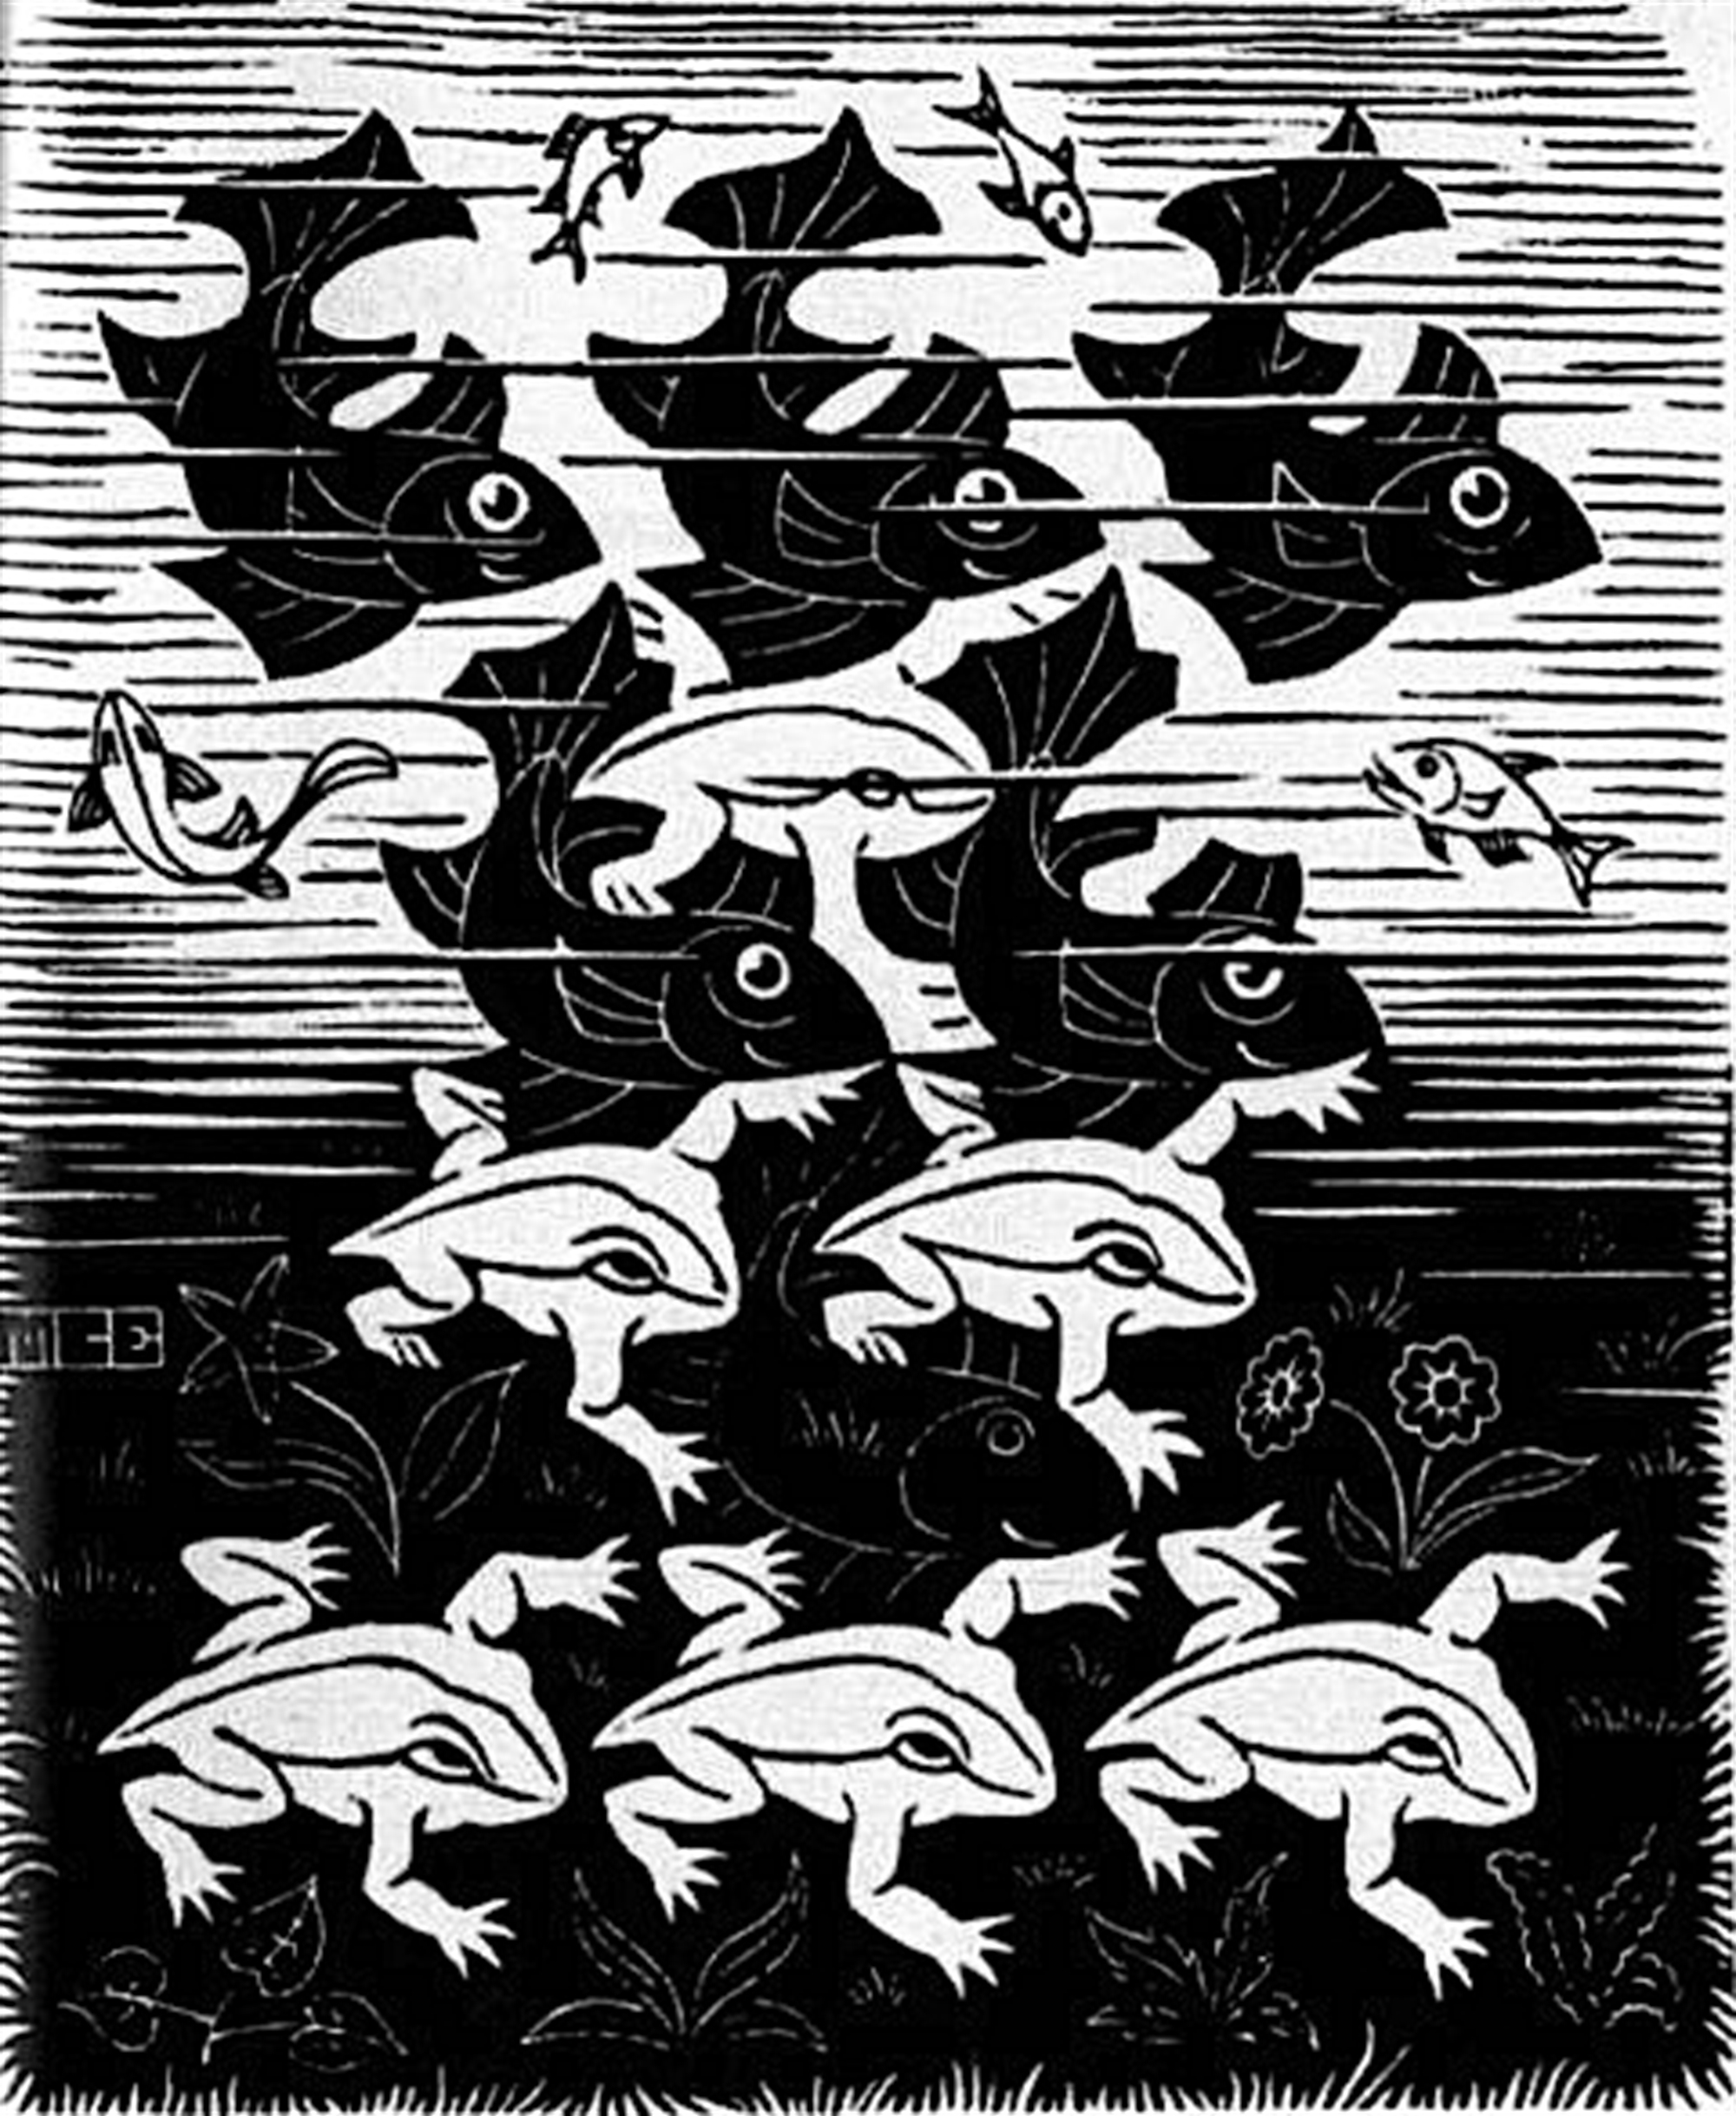 Fish And Frogs By M C Escher Skot Foreman Gallery